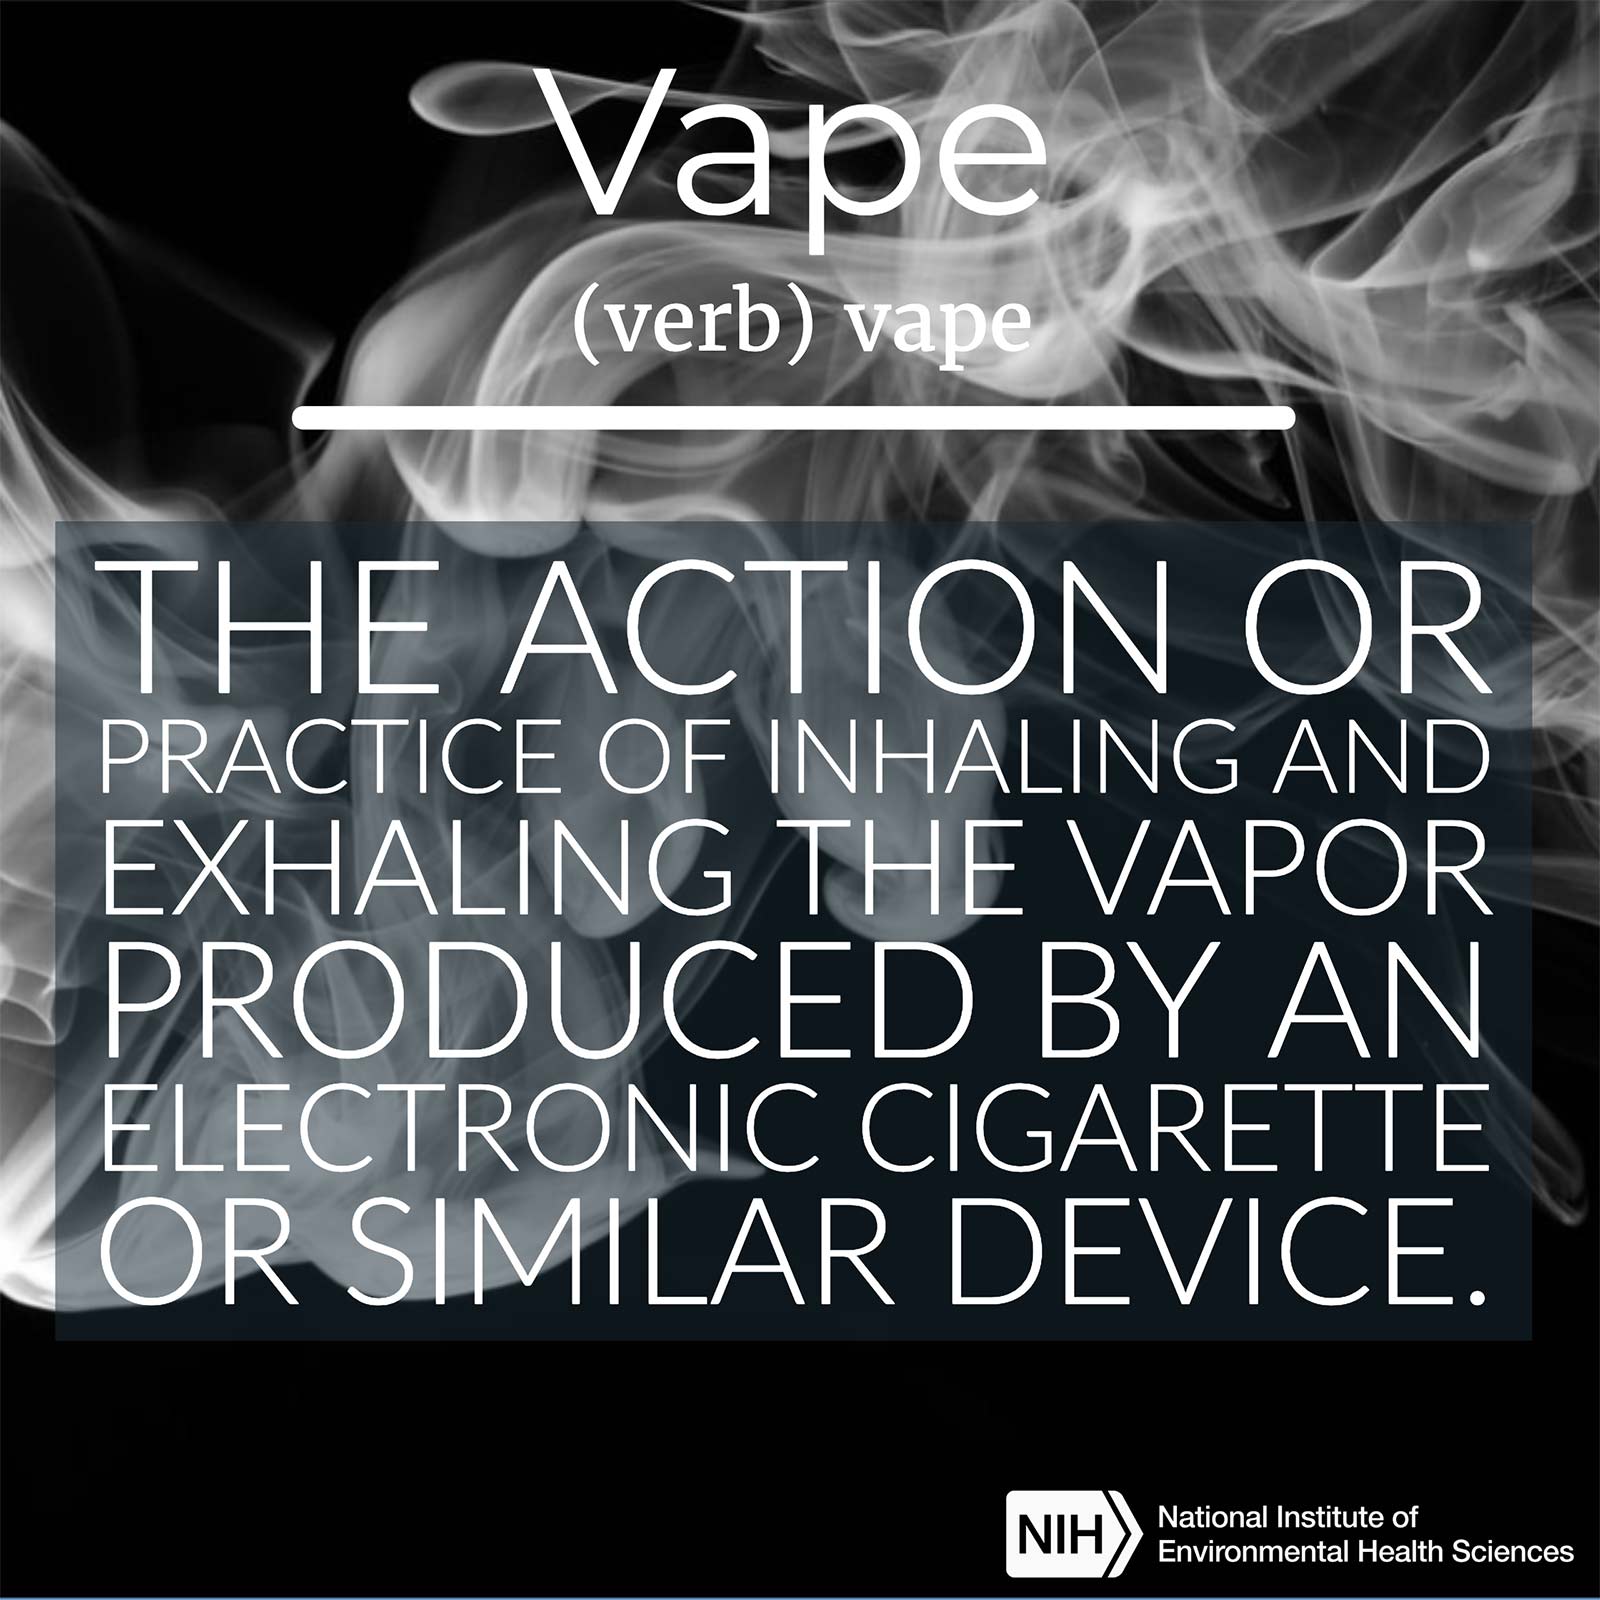 Vape (verb) defined as &#39;The action or practice of inhaling the vapor produced by an electronic cigarette or similar device&#39;